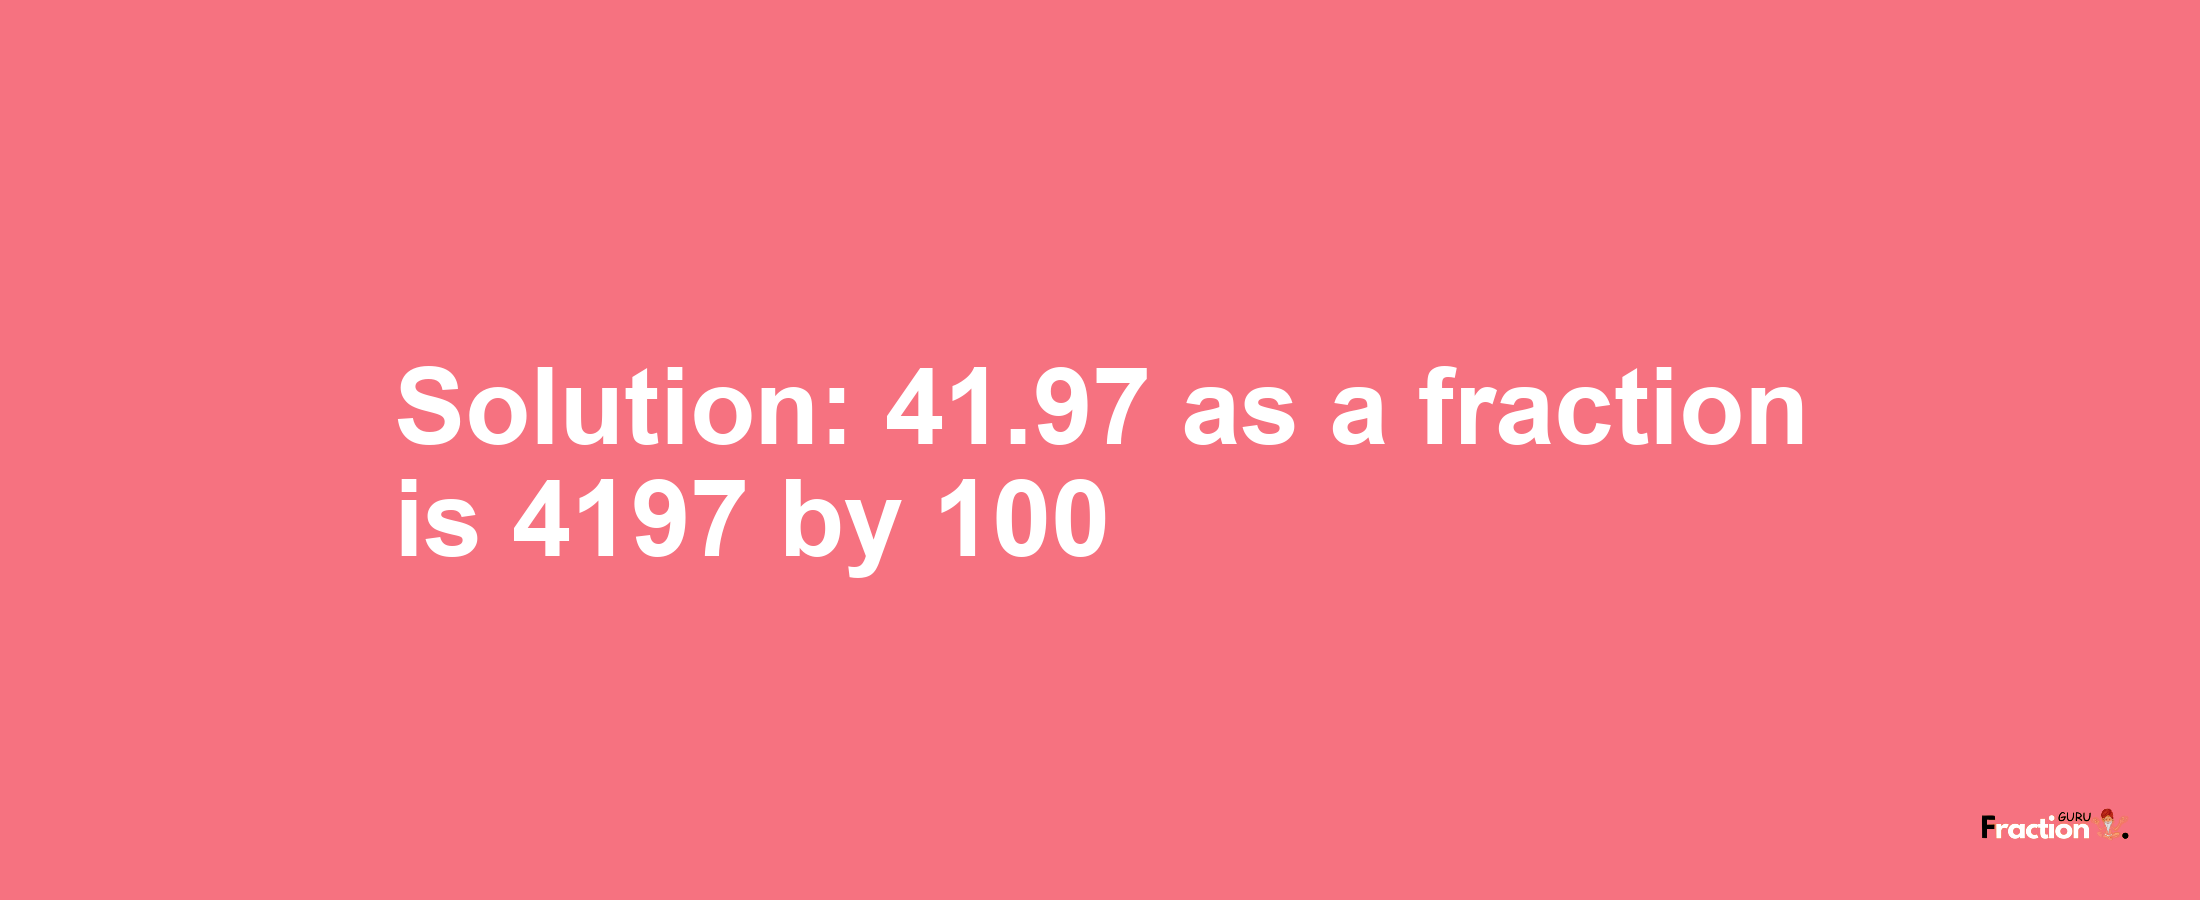 Solution:41.97 as a fraction is 4197/100